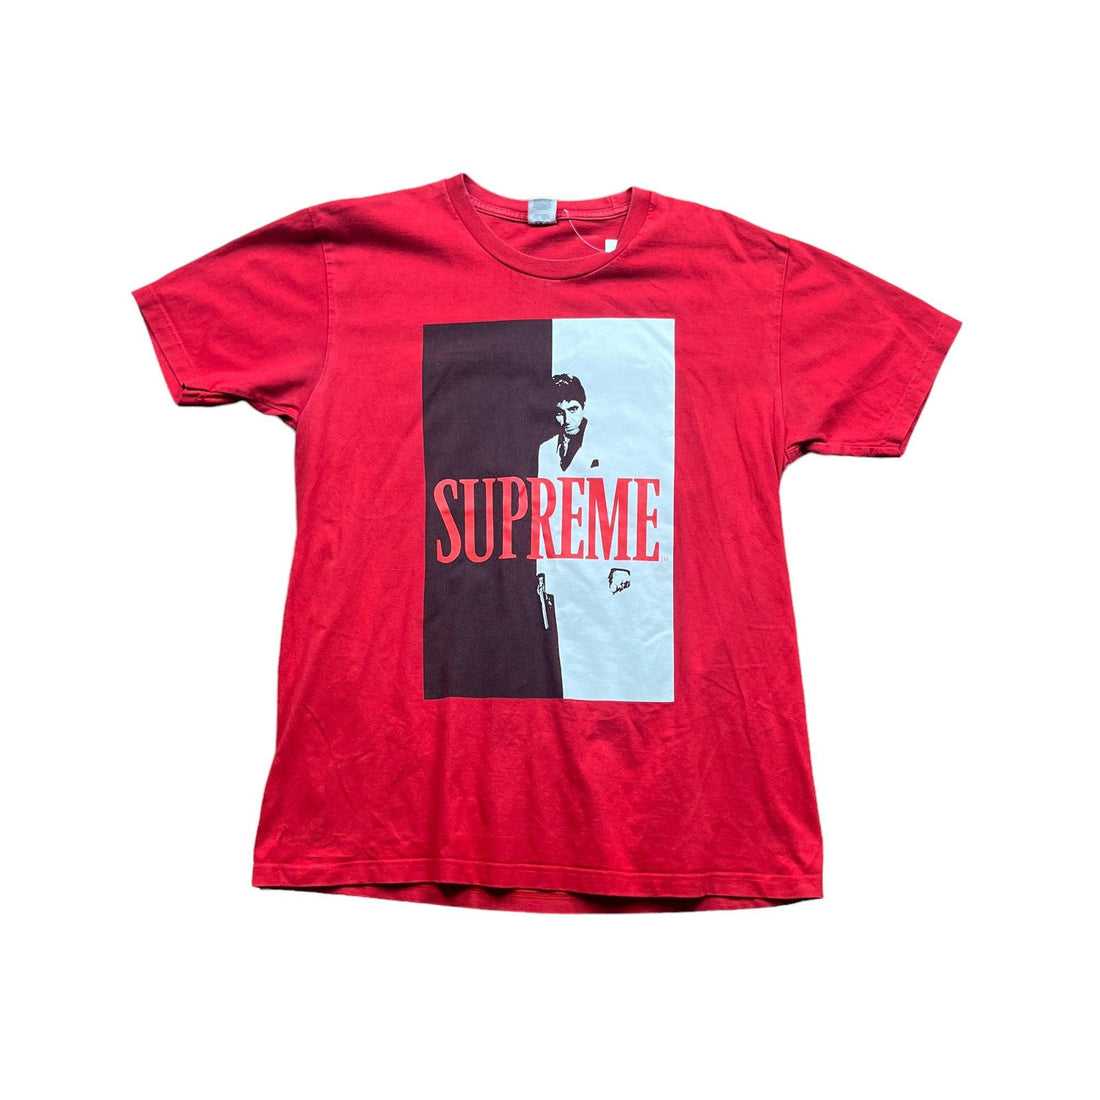 Red Supreme x Scarface Tee - Extra Large - The Streetwear Studio